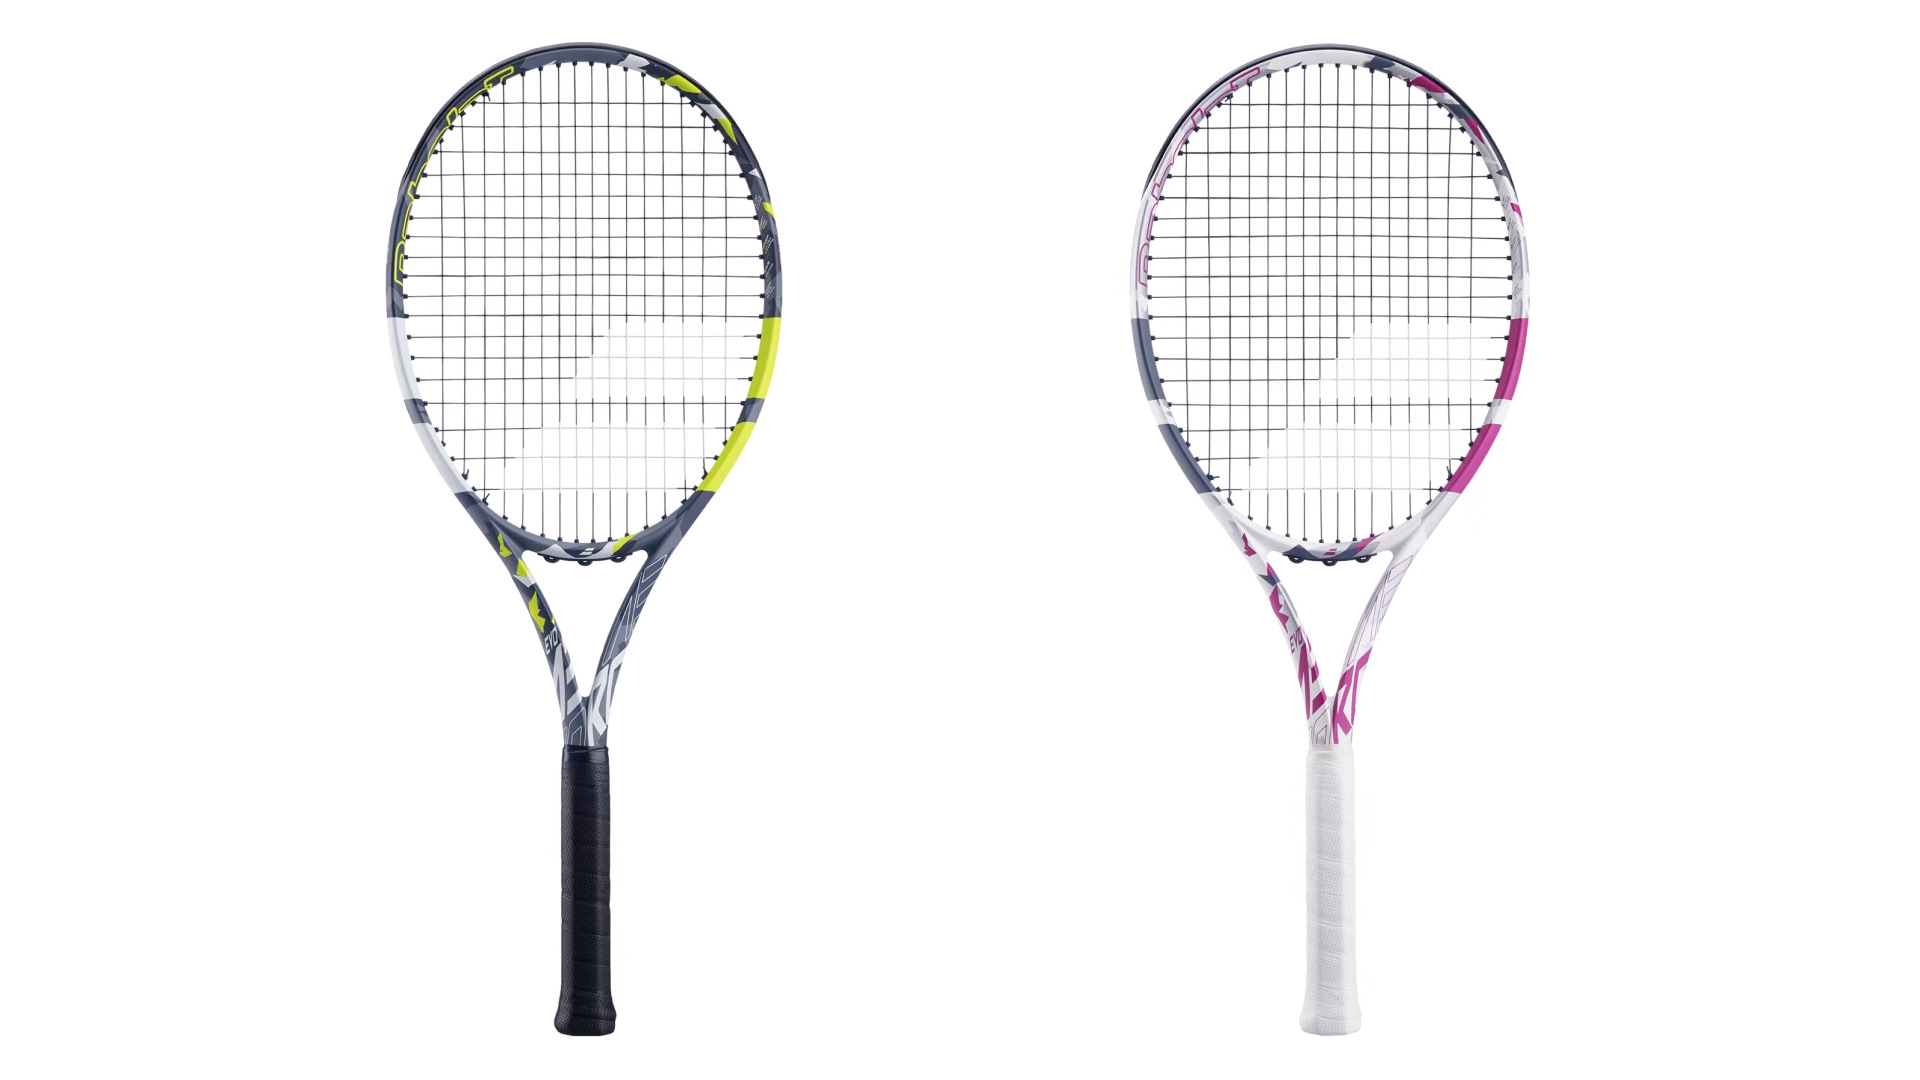 Kilimanjaro bezoek zuiger Babolat expands popular Evo line with two new racquet models